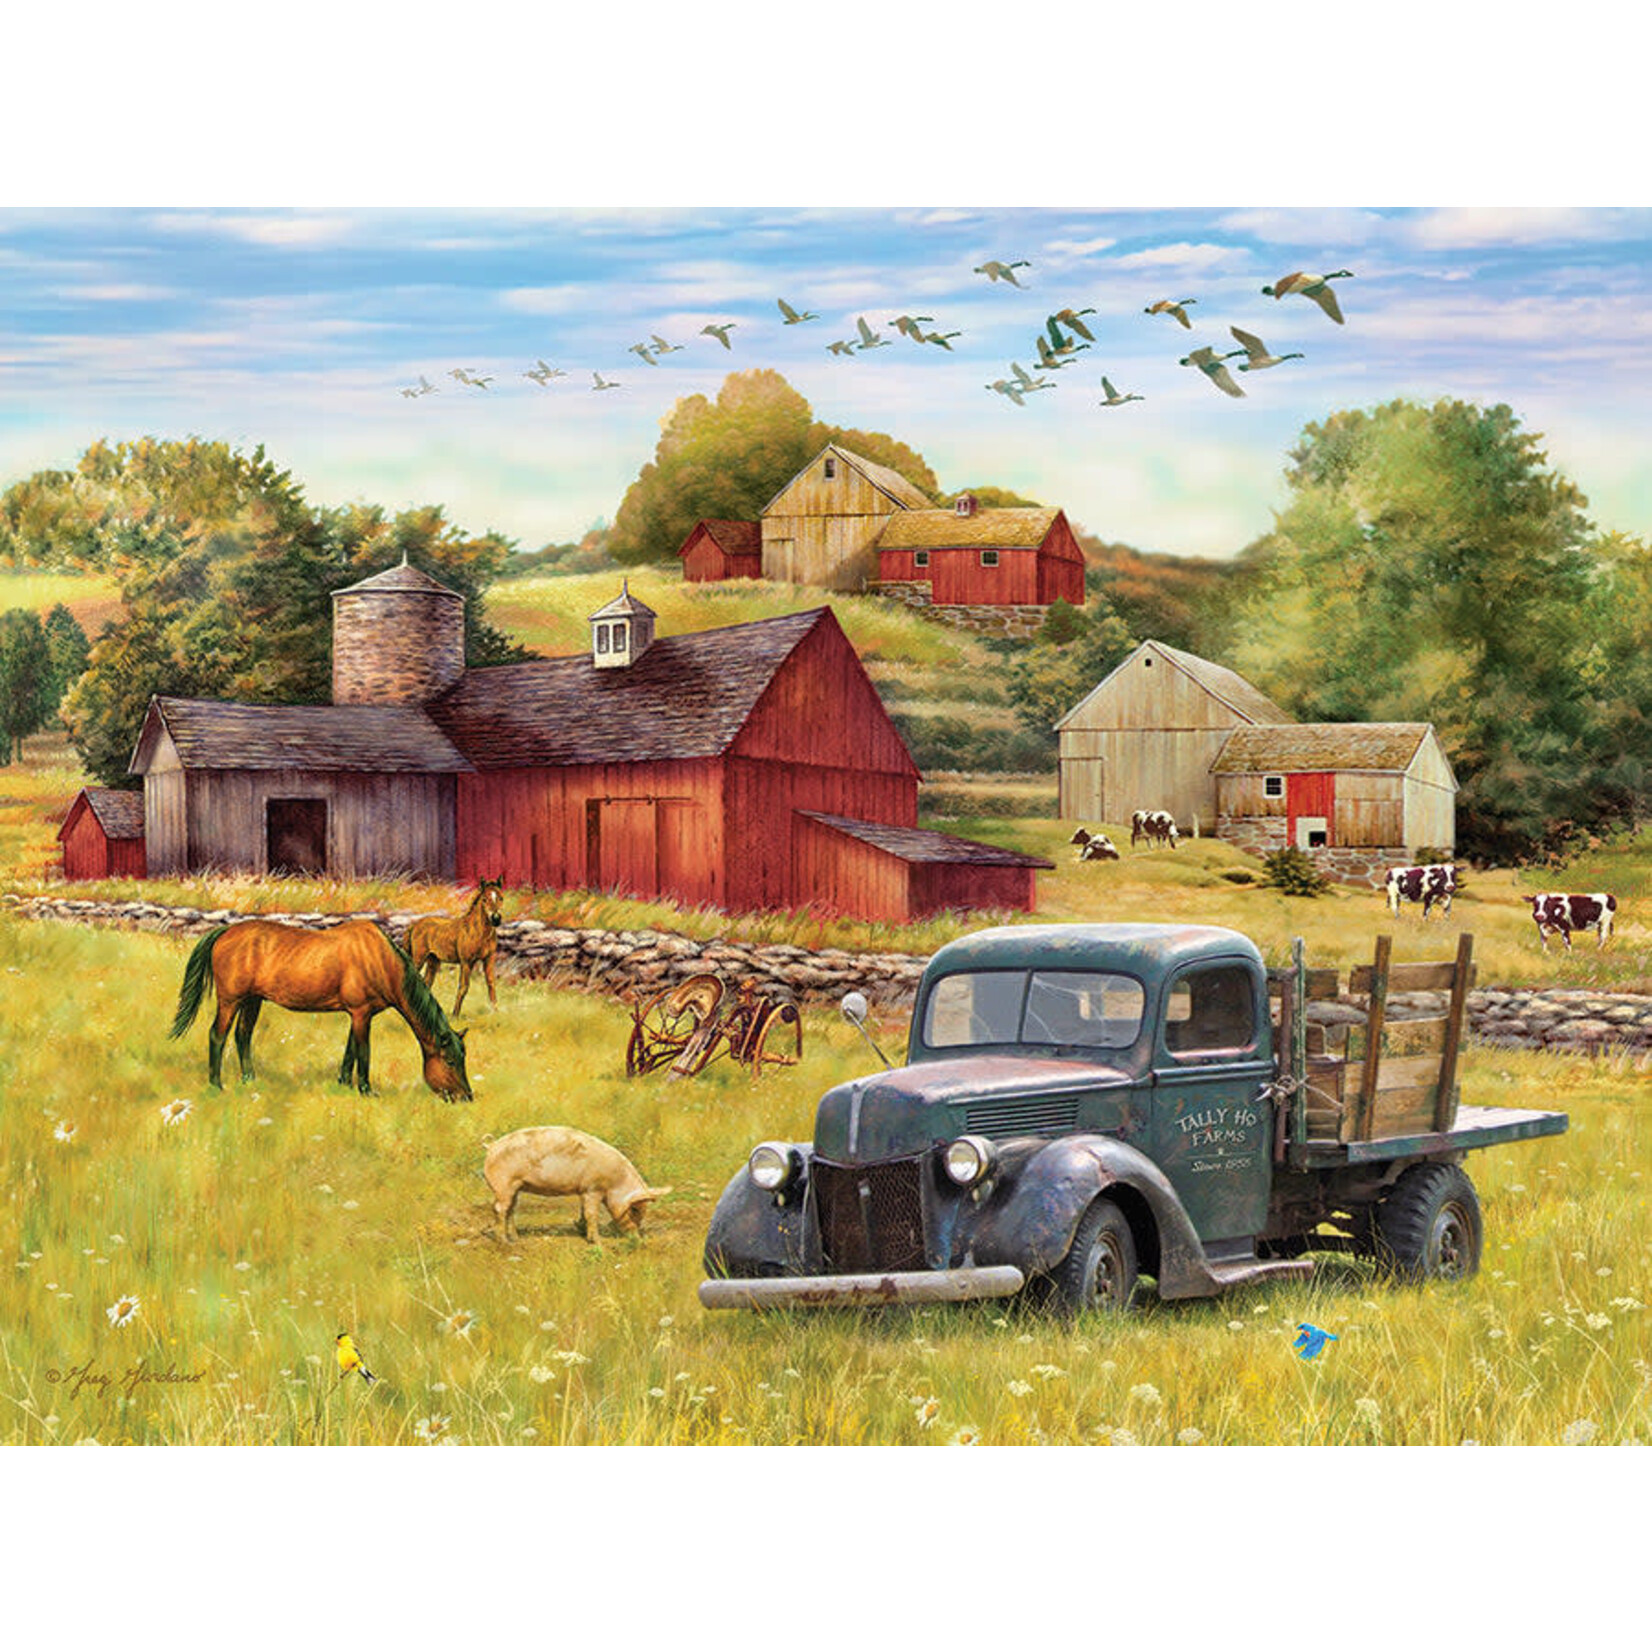 Cobble Hill Summer Afternoon on the Farm 275 Piece Puzzle